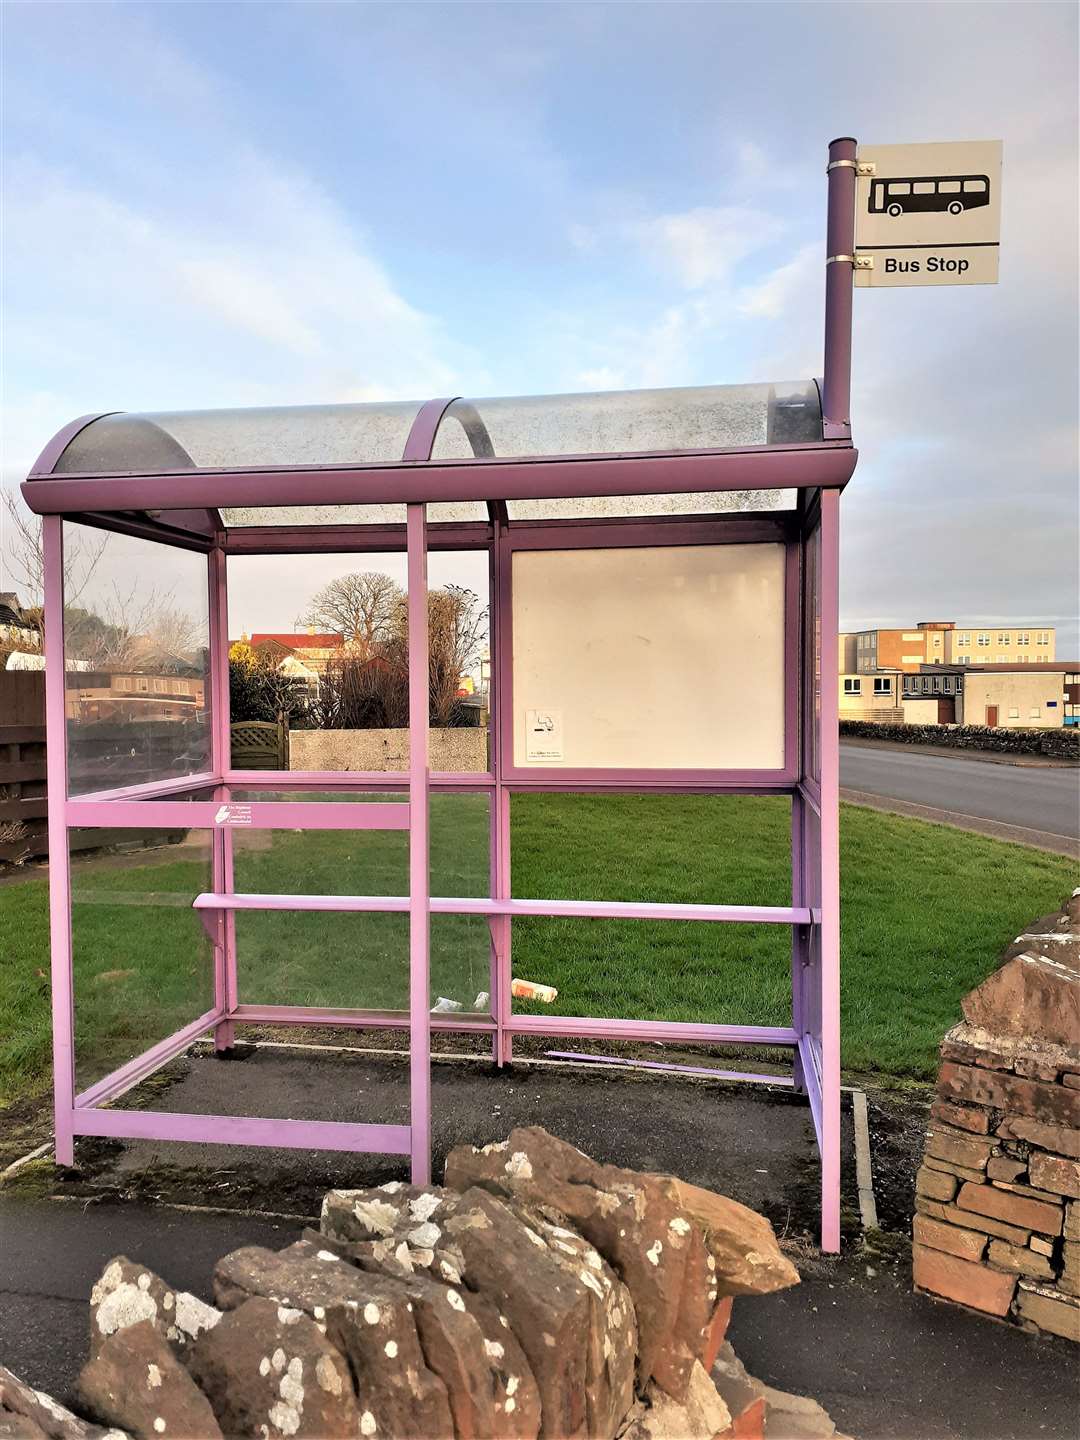 Another bus shelter at North Highland College highlighted by the community activist.